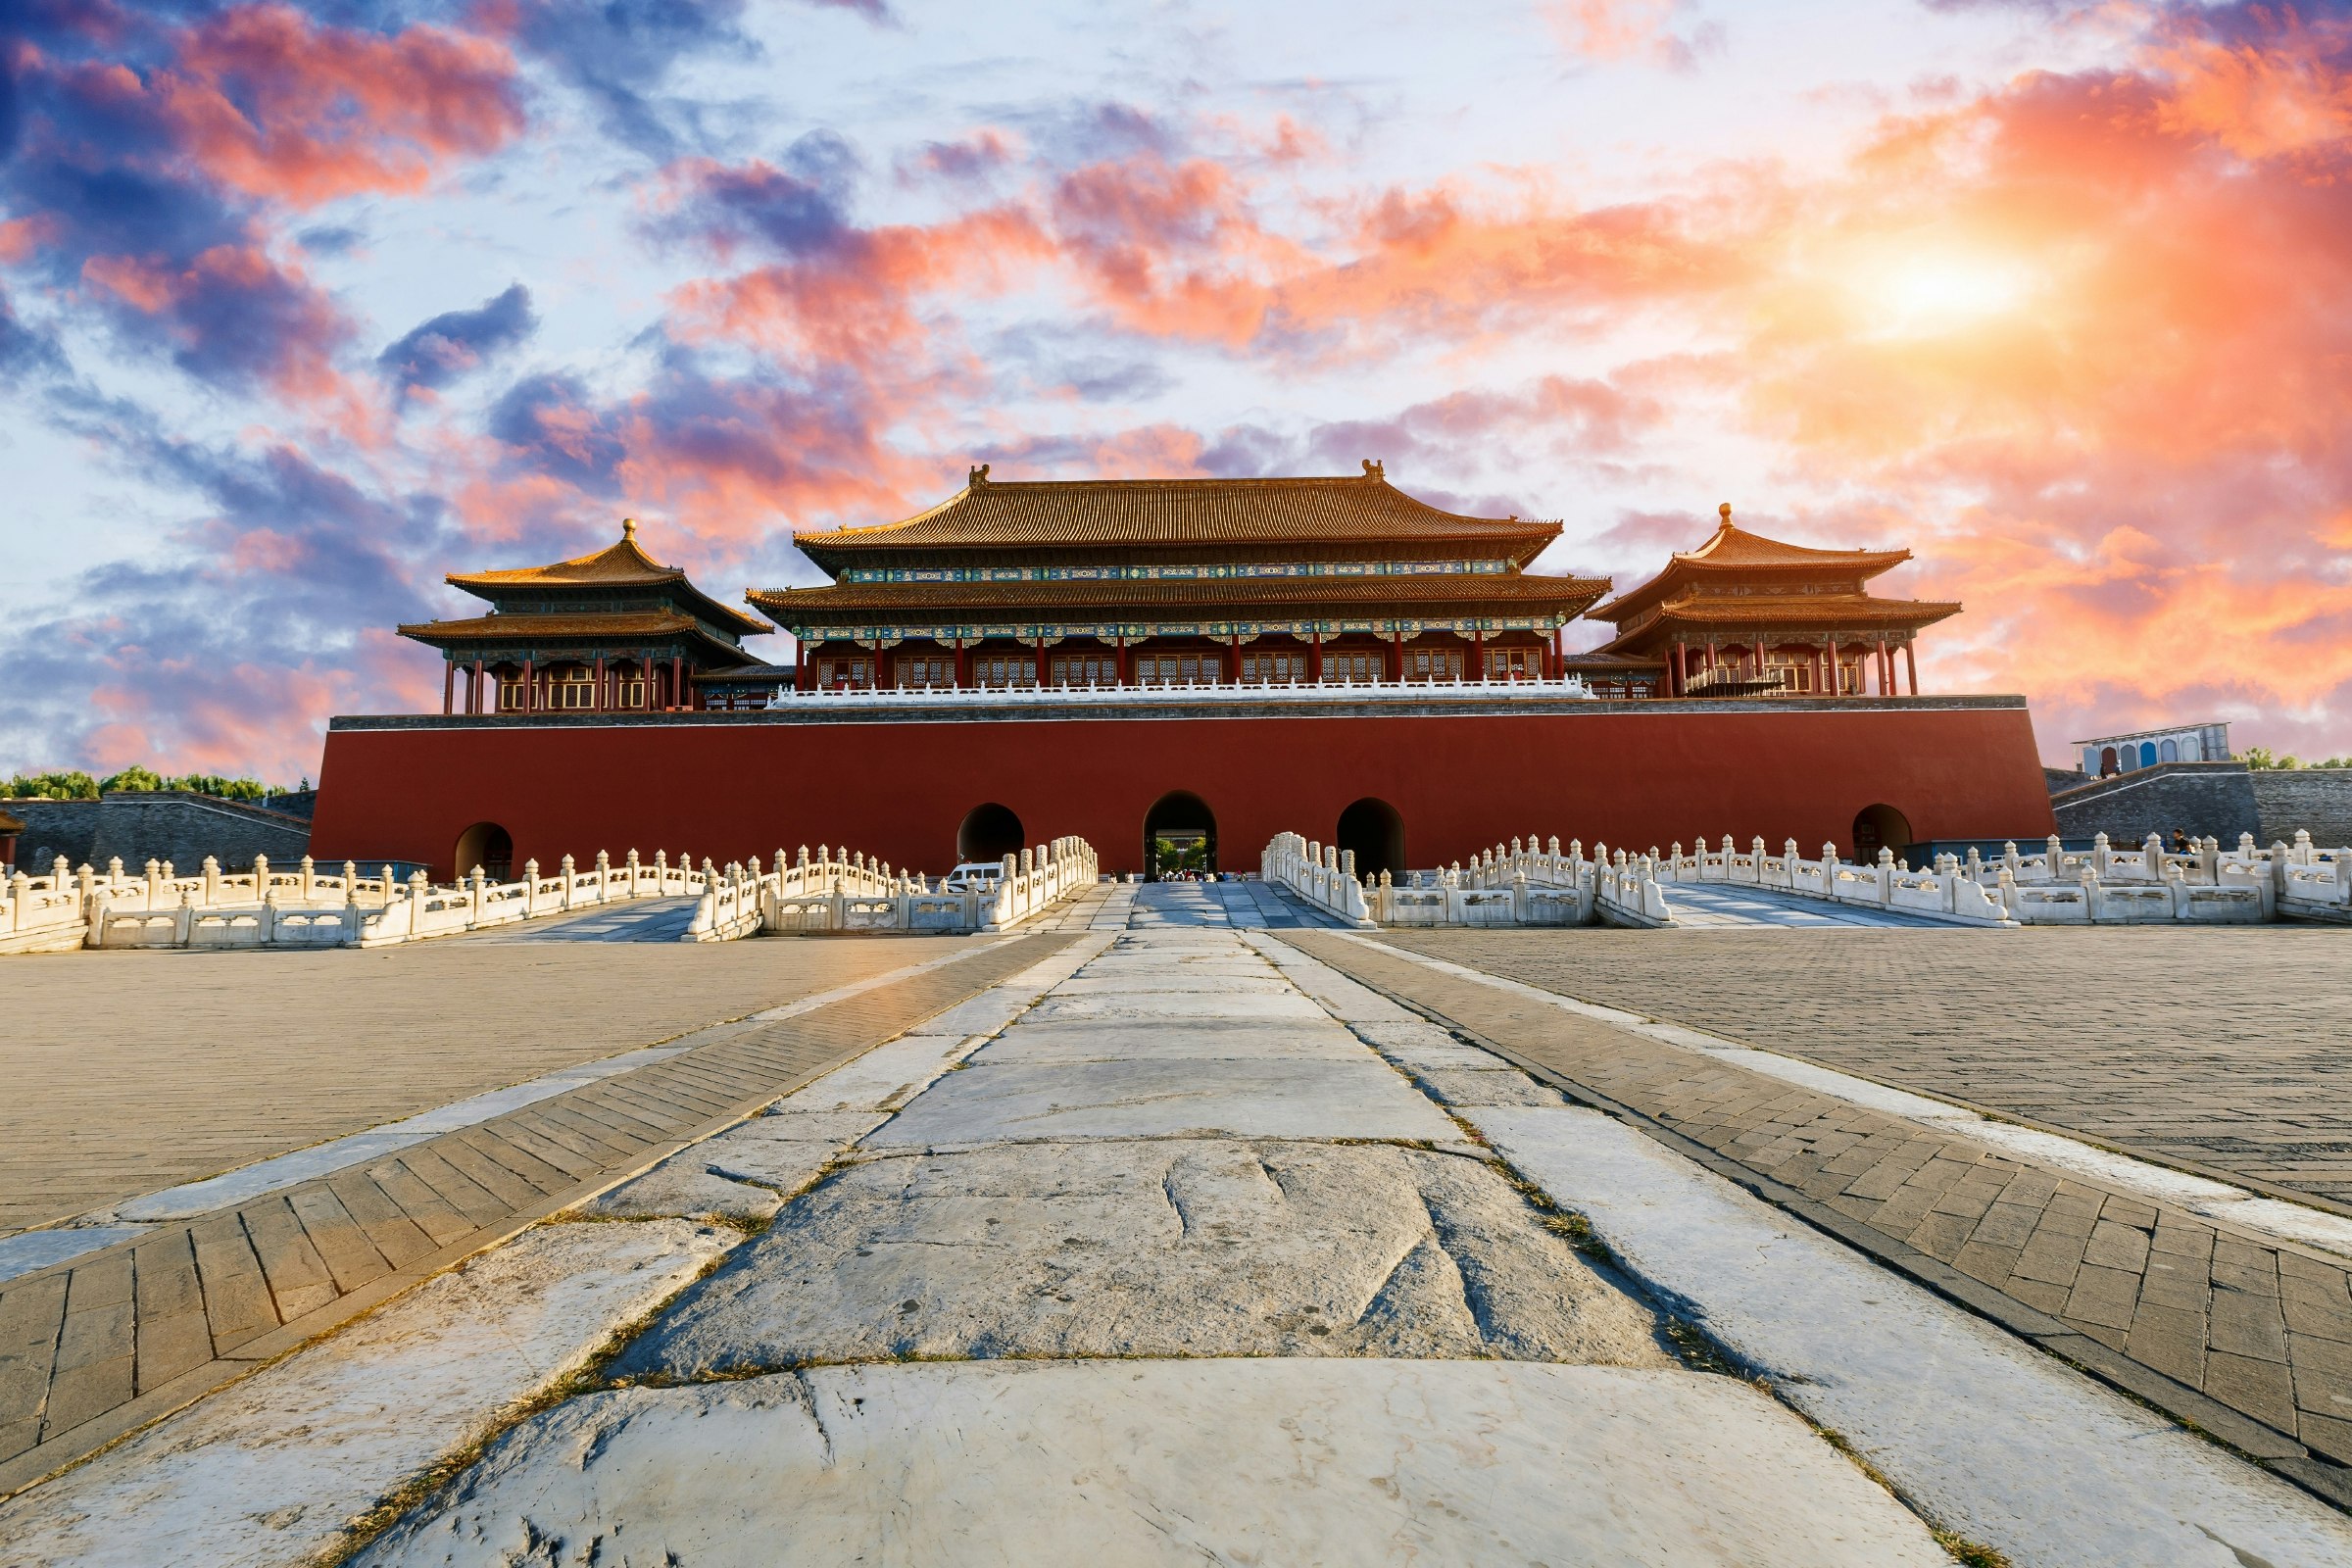 Travel News - ancient royal palaces of the Forbidden City in Beijing, China